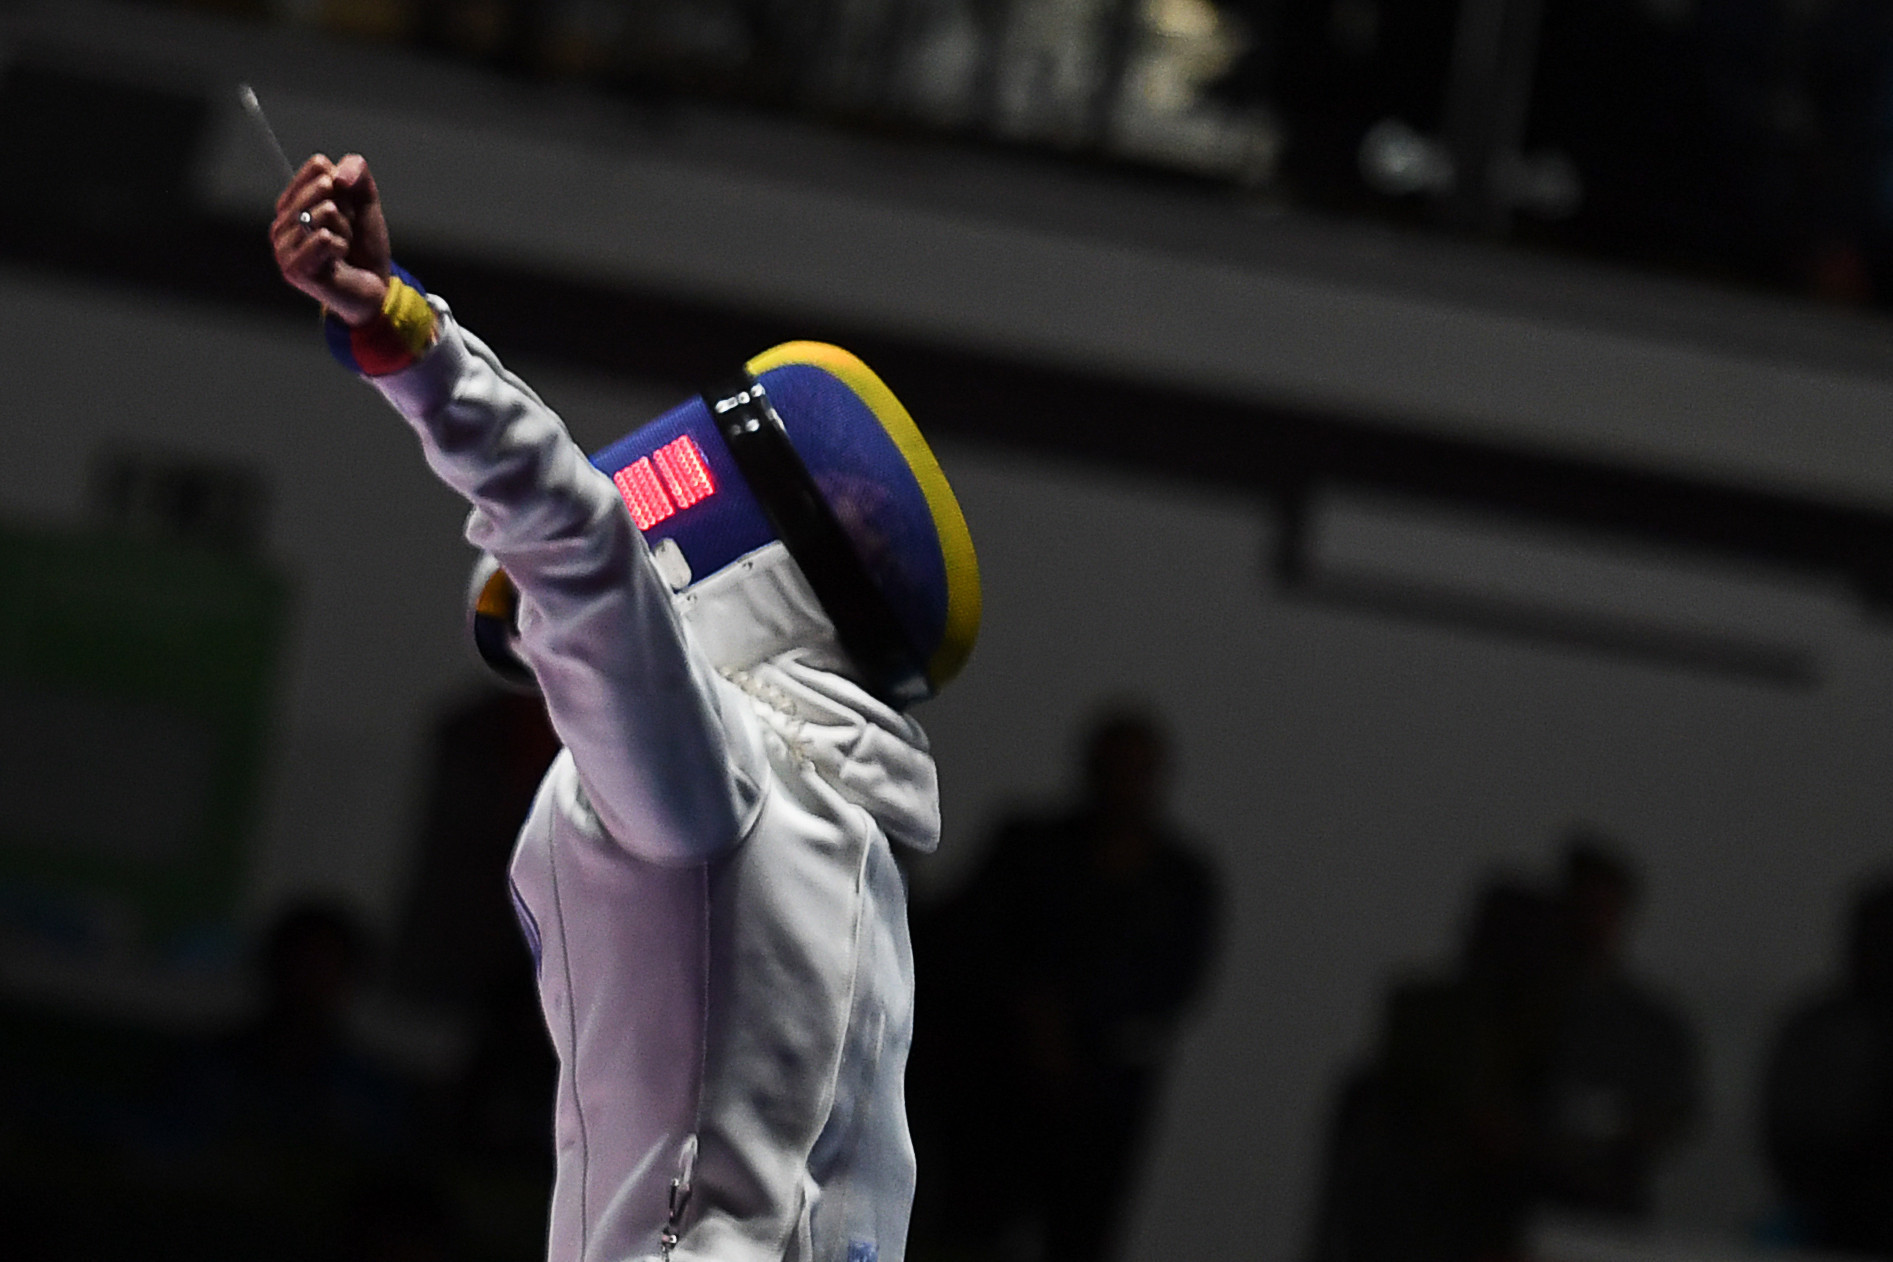 Ana Maria Popescu of Romania claimed the women's title at the FIE Épée Grand Prix in Doha ©Getty Images